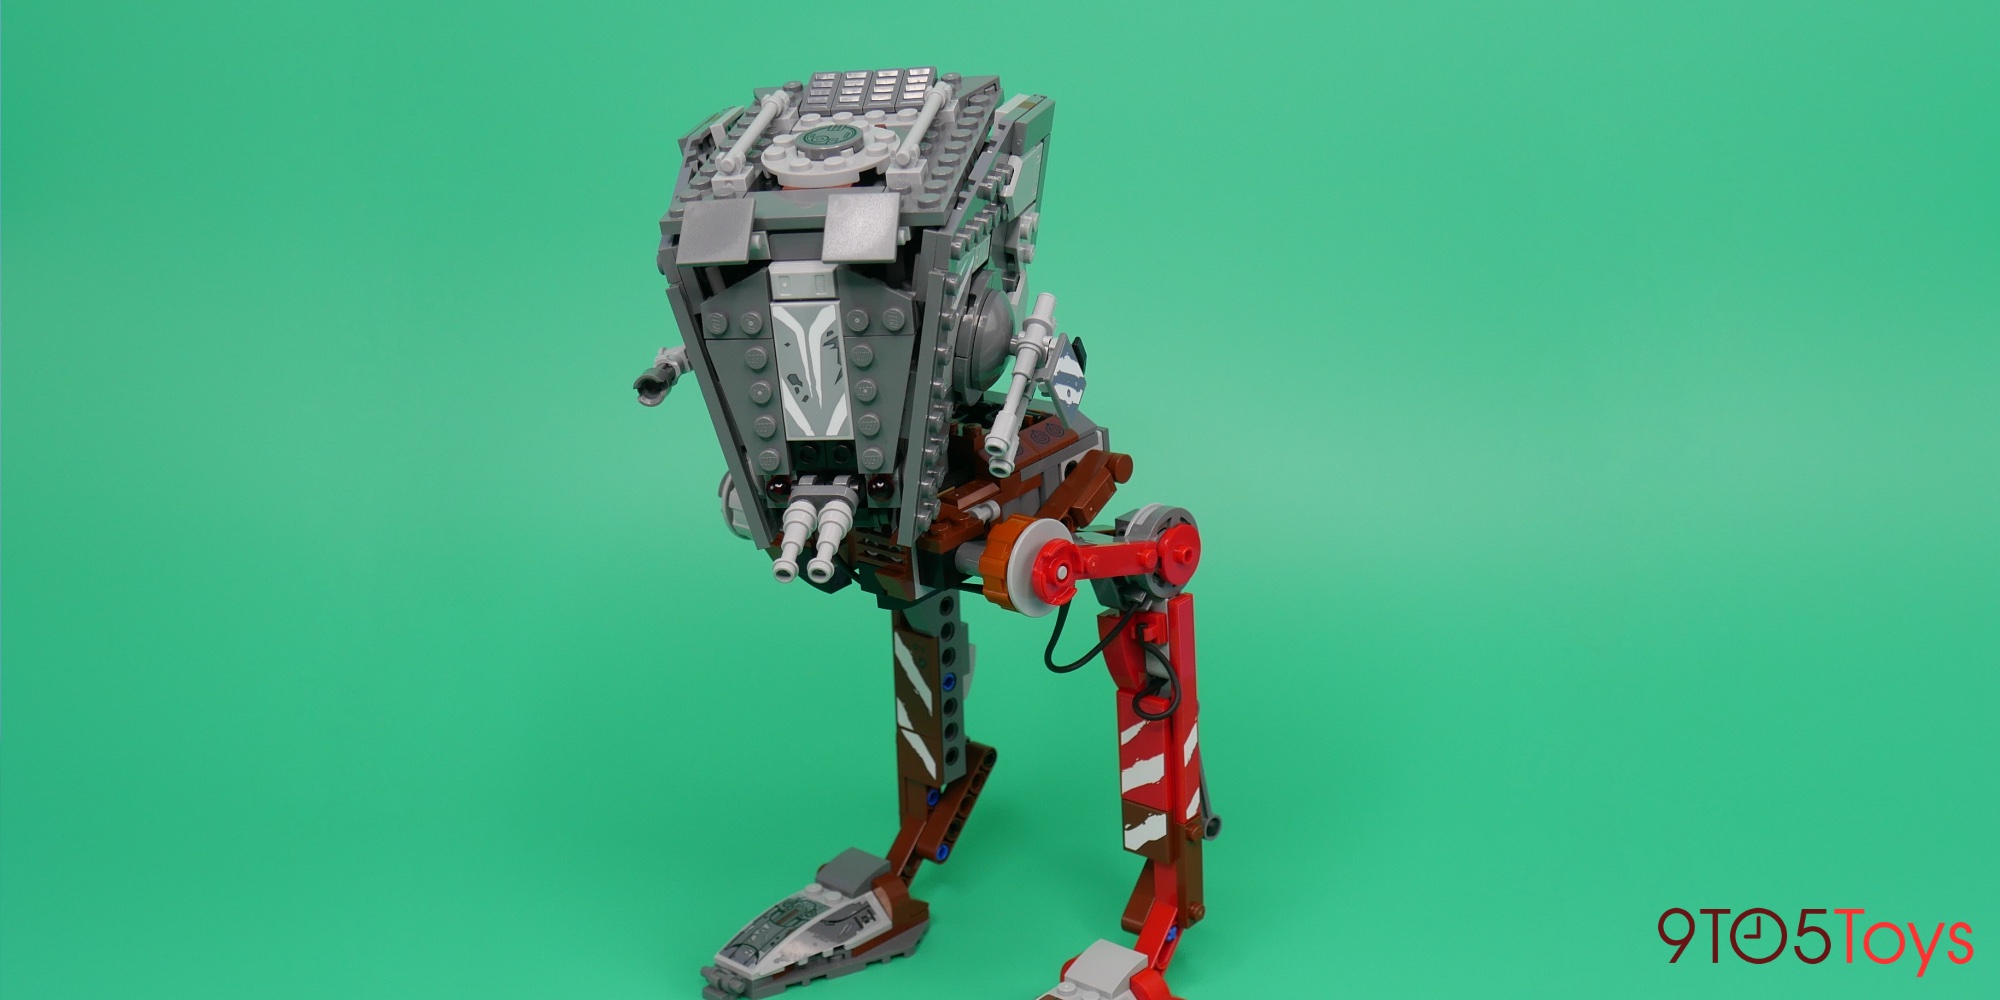 LEGO AT-ST Review